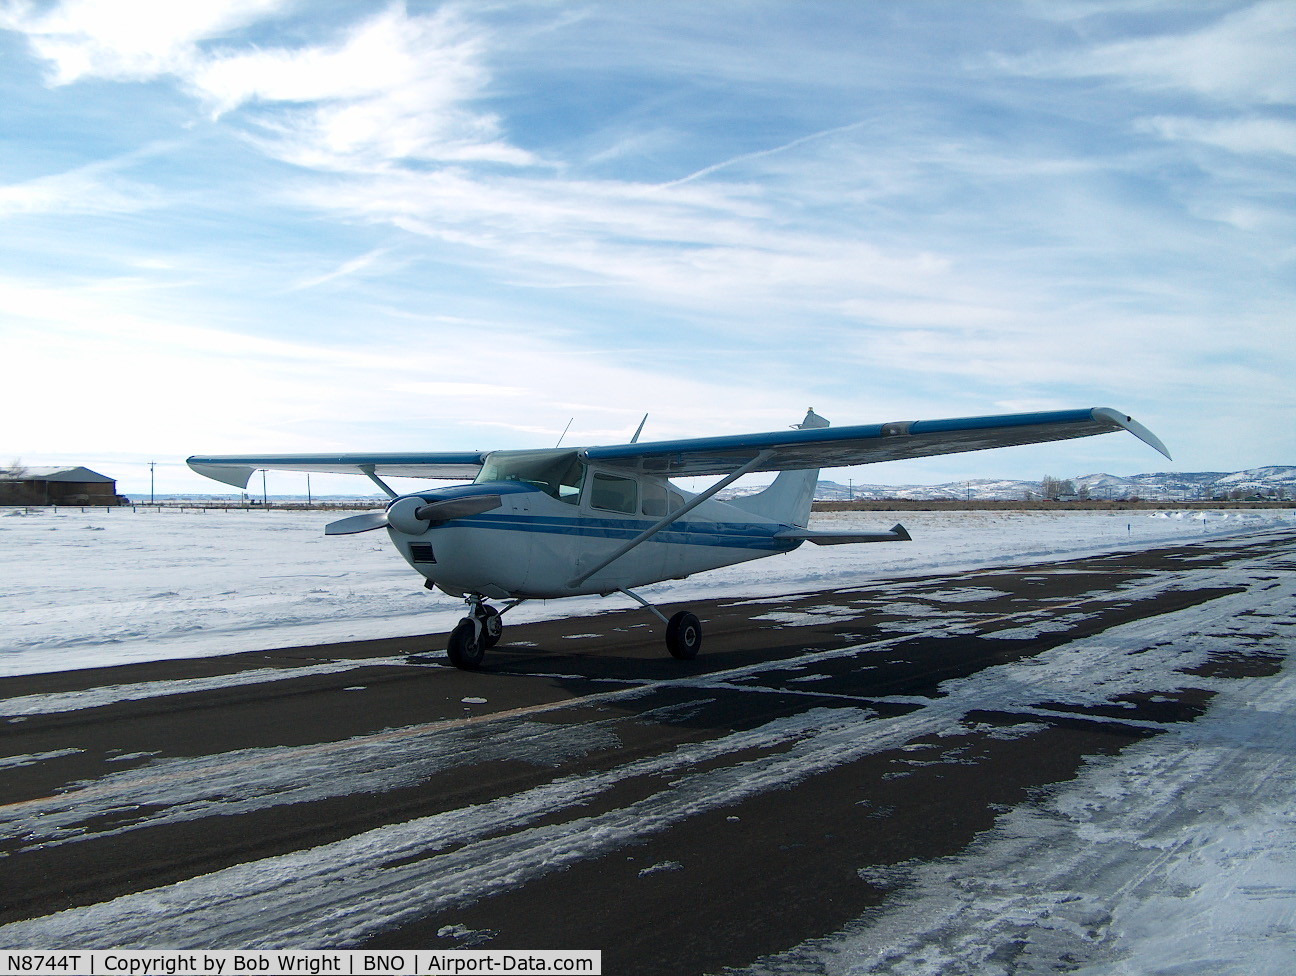 N8744T, 1959 Cessna 182C Skylane C/N 52644, Winter Day on the taxi way